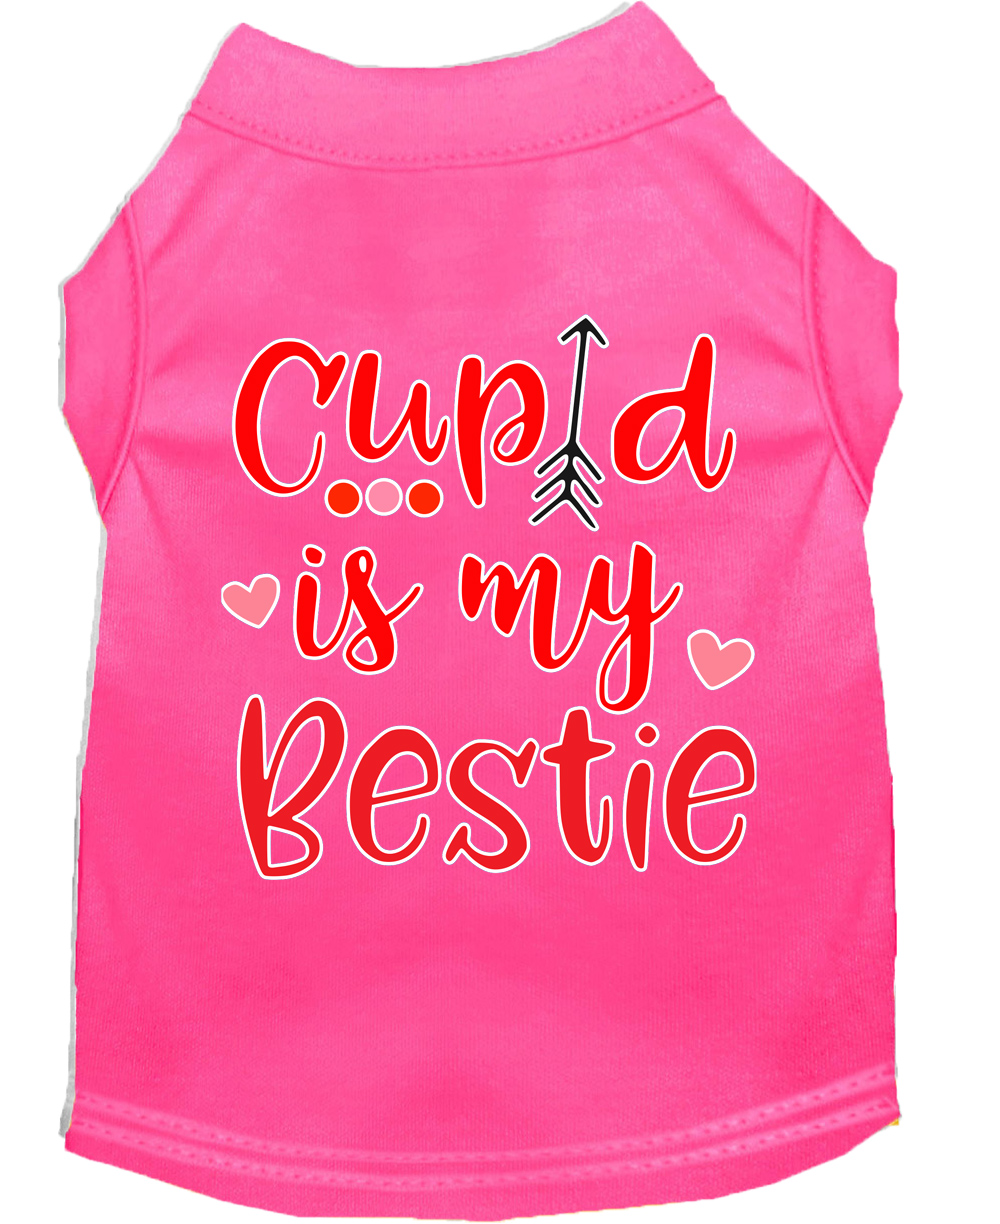 Cupid is my Bestie Screen Print Dog Shirt Bright Pink Med